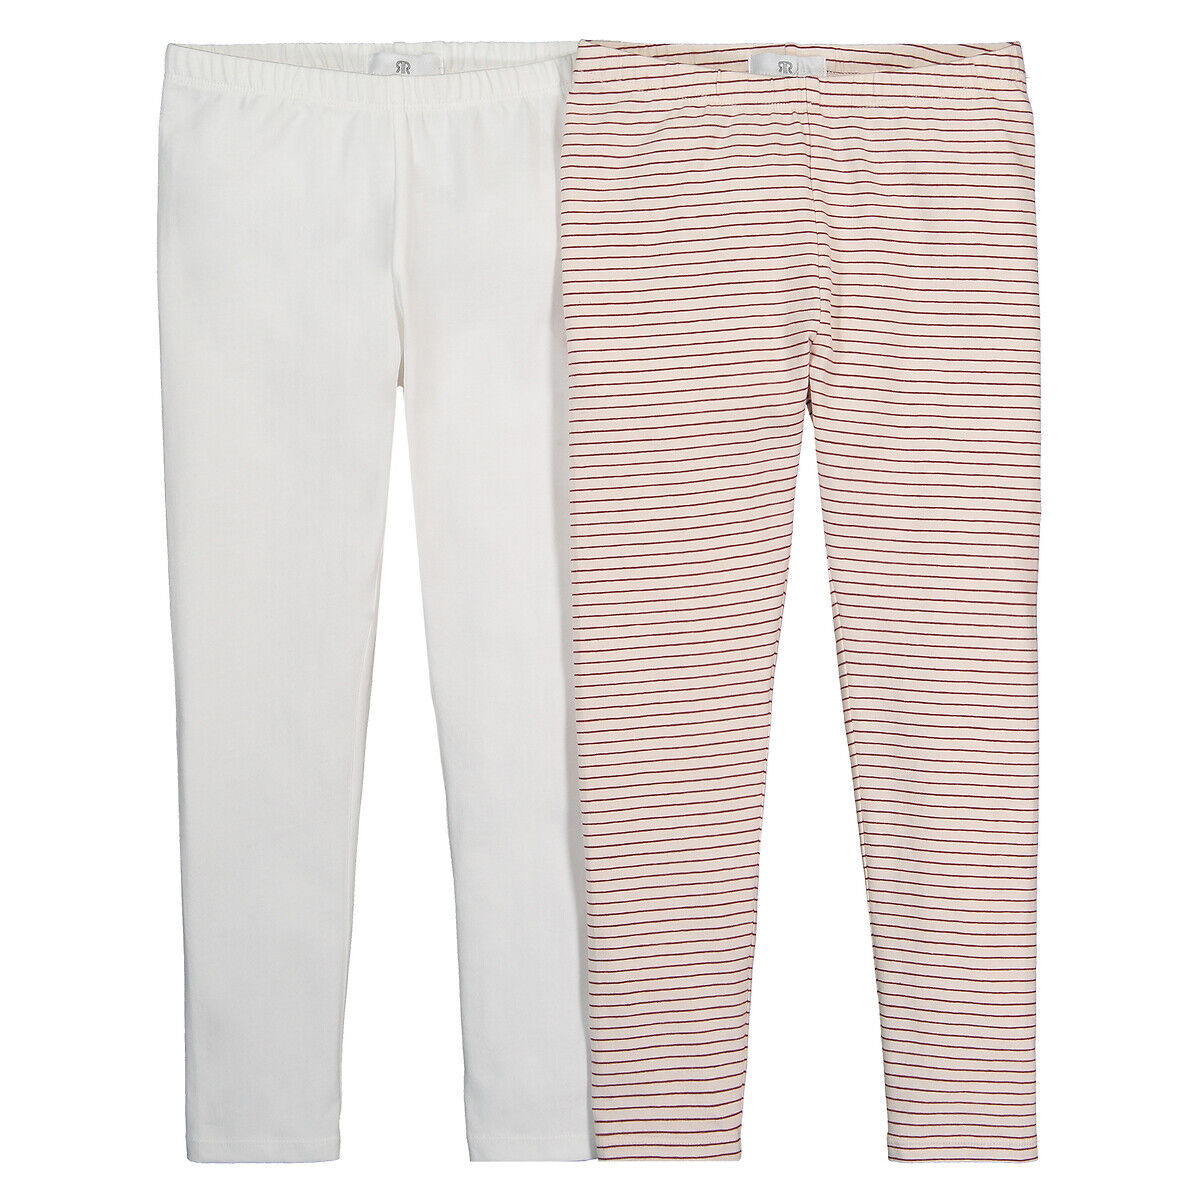 LA REDOUTE COLLECTIONS 2er-Pack Leggings, Bio-Baumwolle, 3-12 Jahre ROSA